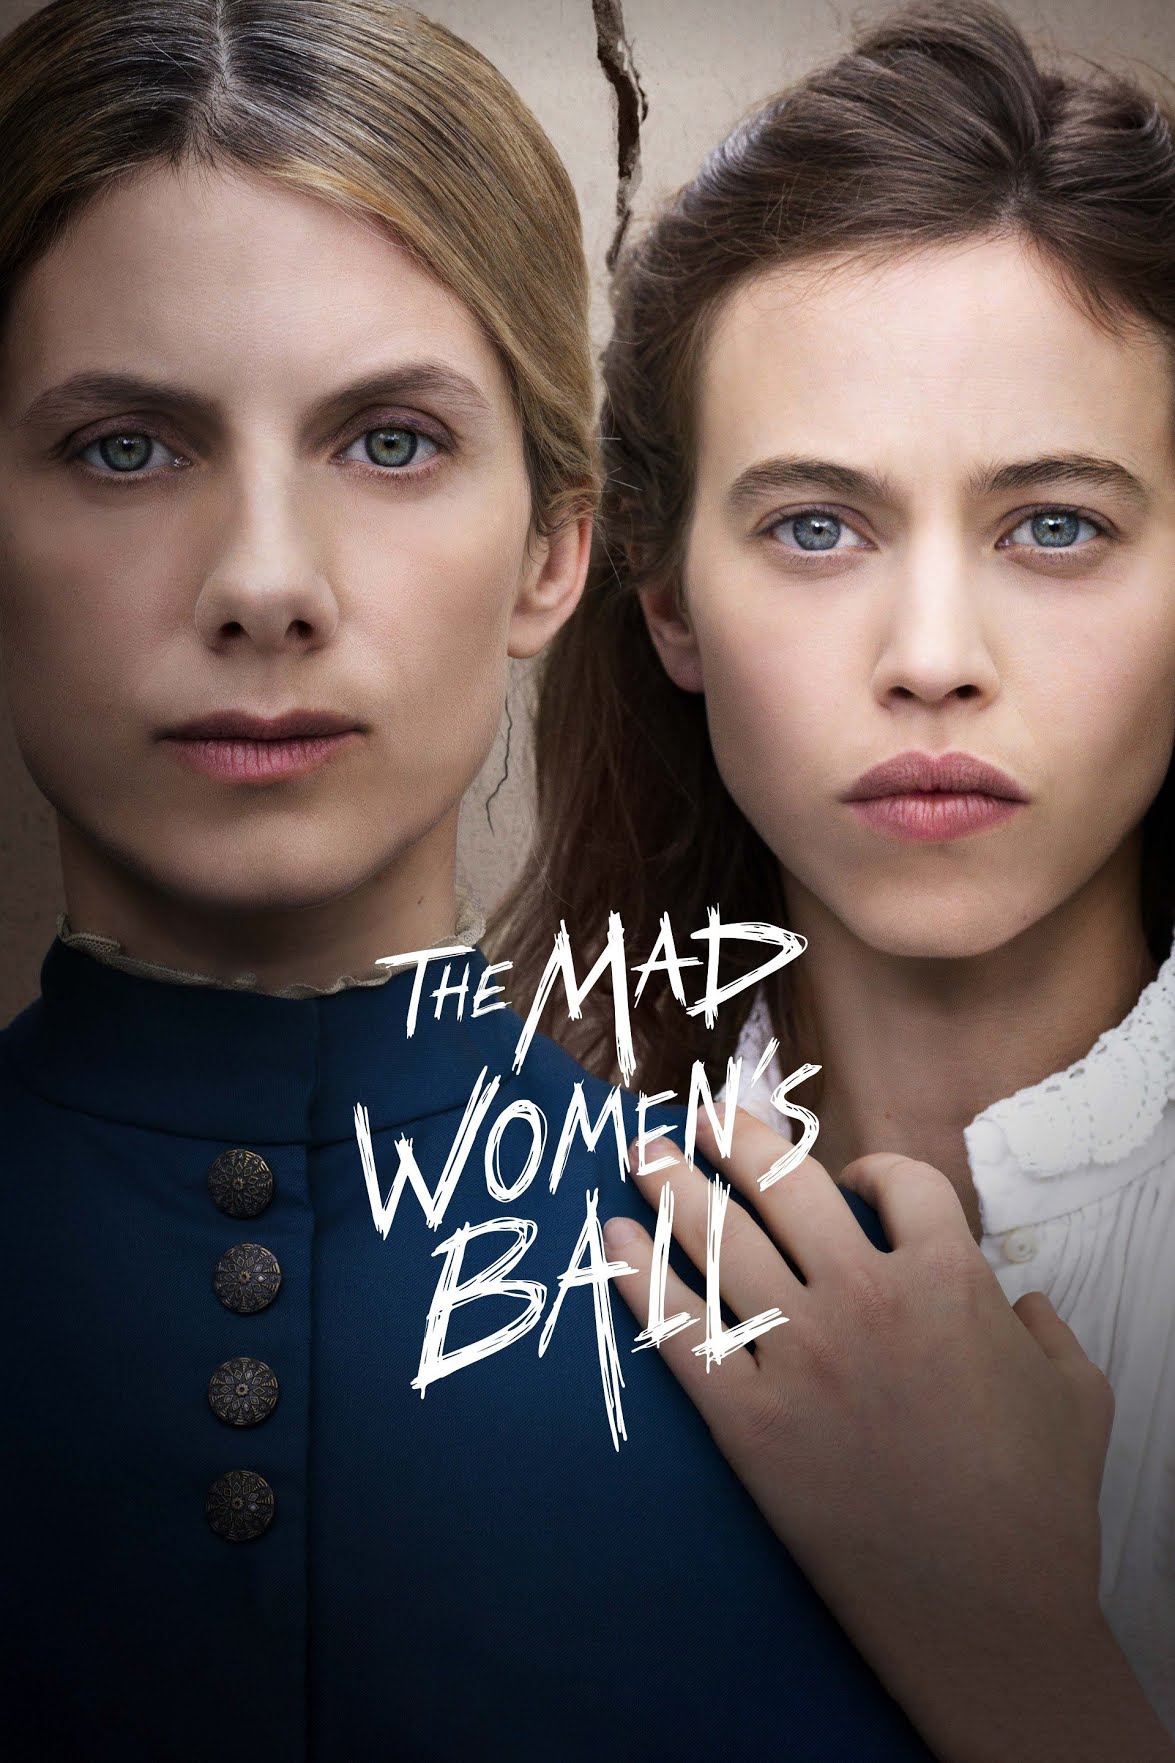 THE MAD WOMEN’S BALL